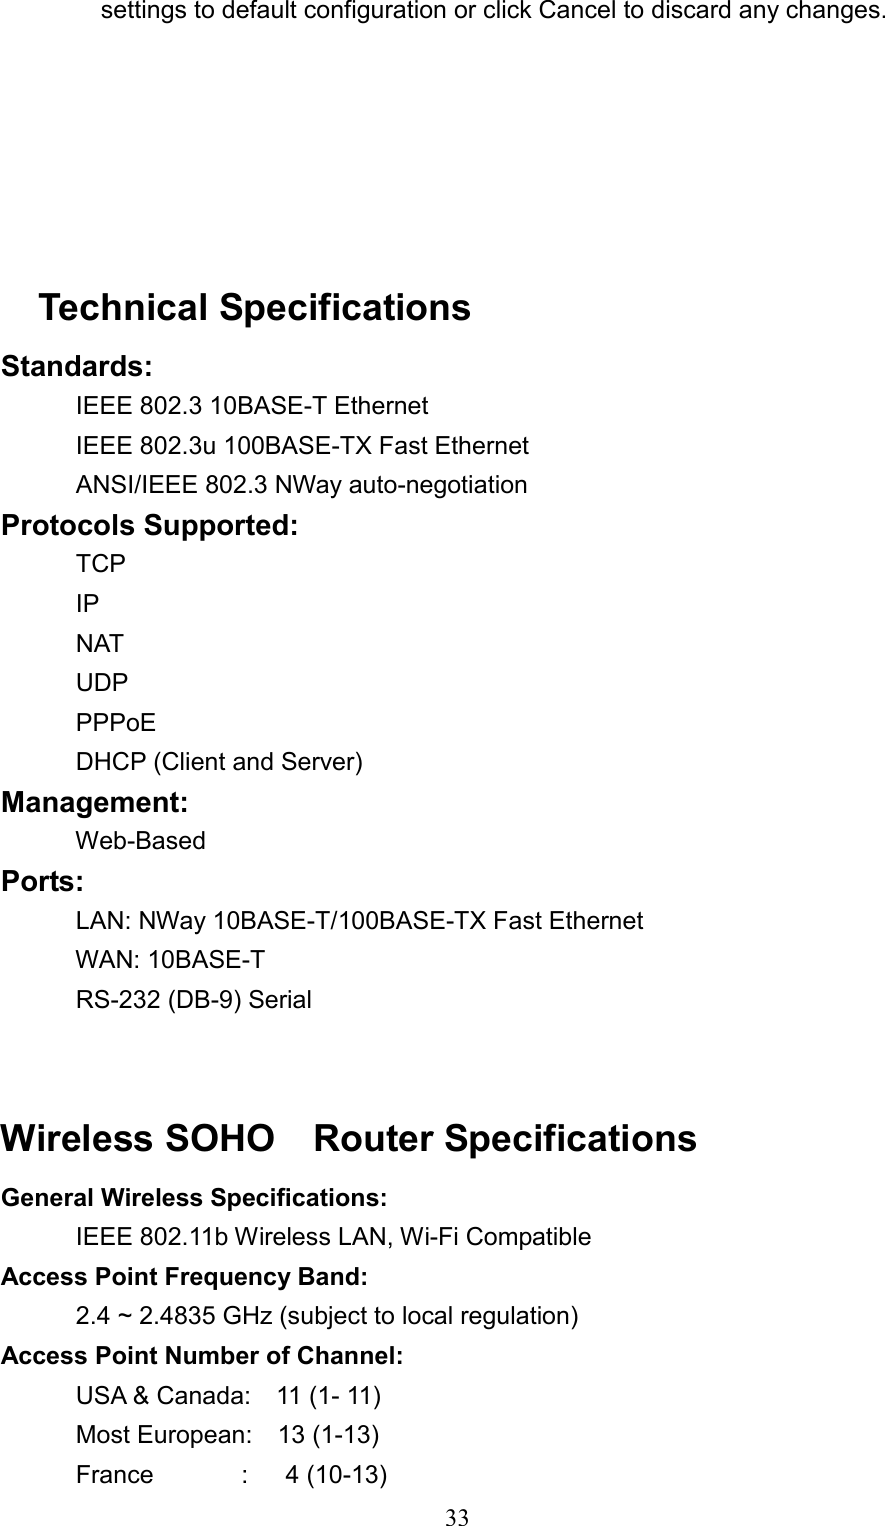  33          settings to default configuration or click Cancel to discard any changes.       Technical Specifications Standards:     IEEE 802.3 10BASE-T Ethernet    IEEE 802.3u 100BASE-TX Fast Ethernet    ANSI/IEEE 802.3 NWay auto-negotiation Protocols Supported:     TCP    IP    NAT    UDP    PPPoE    DHCP (Client and Server) Management:     Web-Based Ports:        LAN: NWay 10BASE-T/100BASE-TX Fast Ethernet    WAN: 10BASE-T    RS-232 (DB-9) Serial   Wireless SOHO  Router Specifications  General Wireless Specifications:     IEEE 802.11b Wireless LAN, Wi-Fi Compatible  Access Point Frequency Band:        2.4 ~ 2.4835 GHz (subject to local regulation) Access Point Number of Channel:     USA &amp; Canada:  11 (1- 11)    Most European:  13 (1-13)    France       :   4 (10-13) 